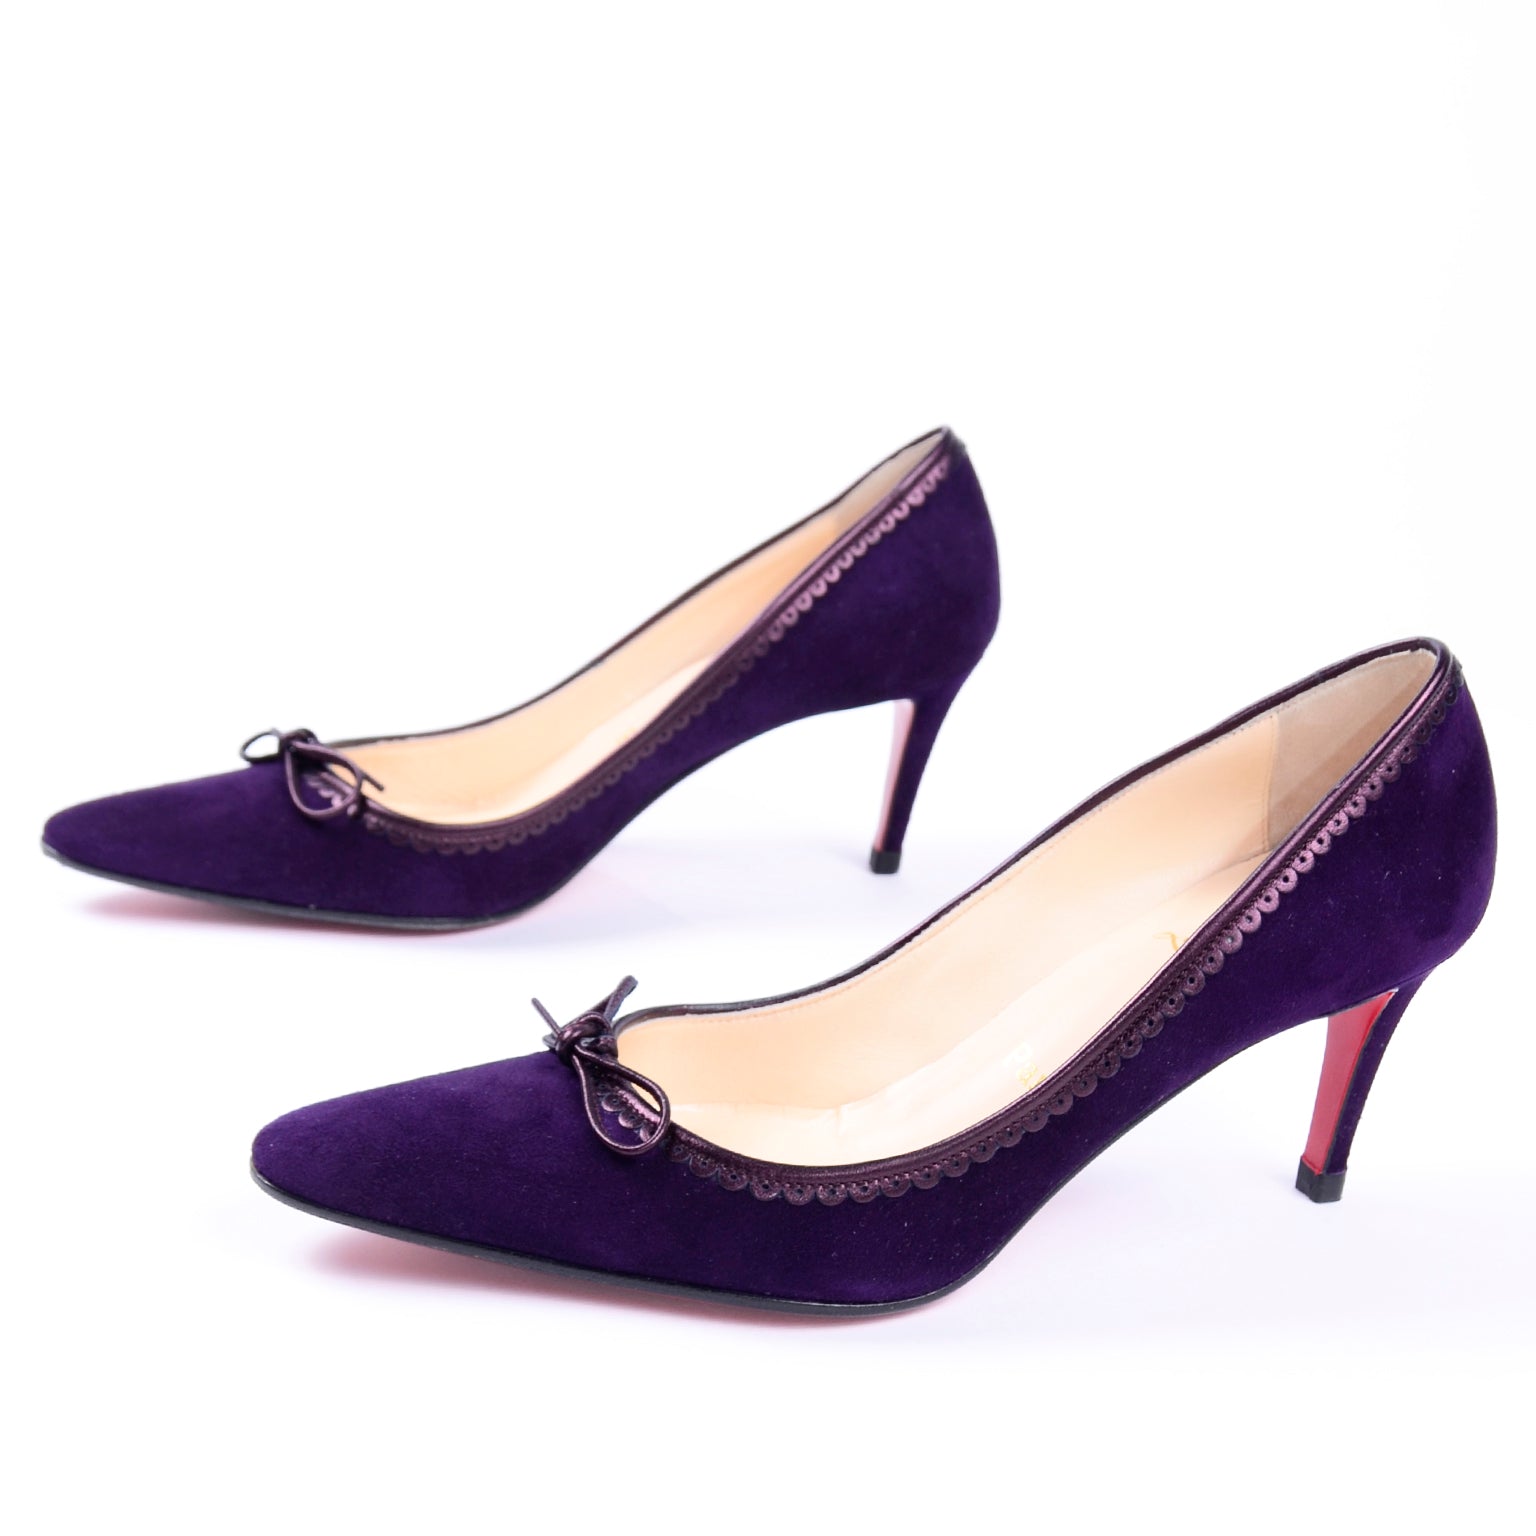 Best Dark-Purple-Shoes - Buy Dark-Purple-Shoes at Cheap Price from China |  Milanoo.com